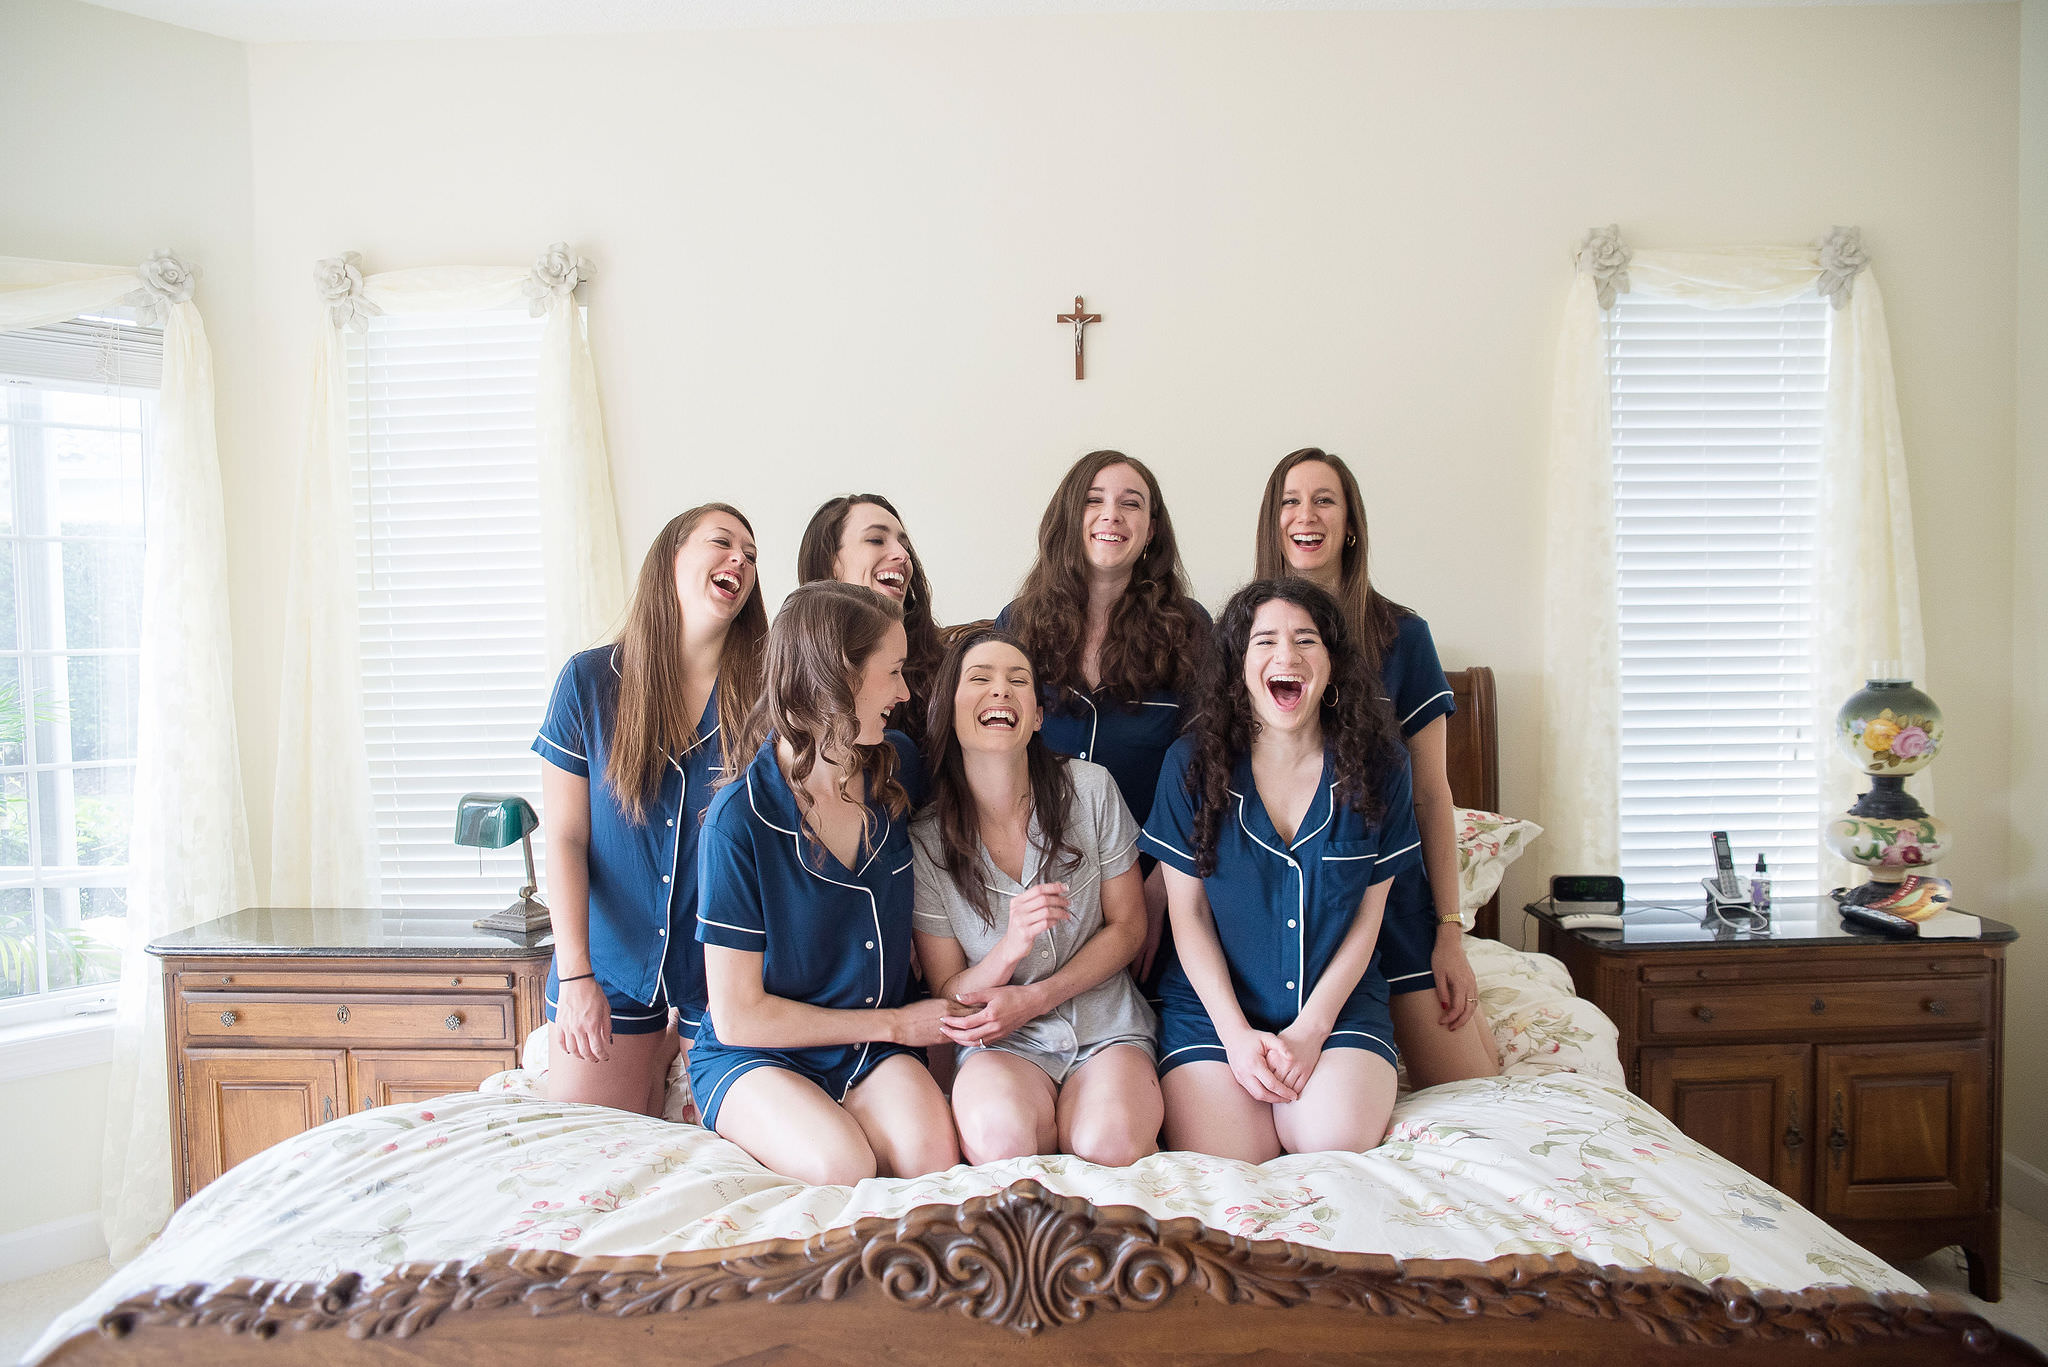 Florida Bride and Bridesmaids in Blue Short Pajama Matching Sets Getting Ready Wedding Portrait | Tampa Bay Kristen Marie Photography